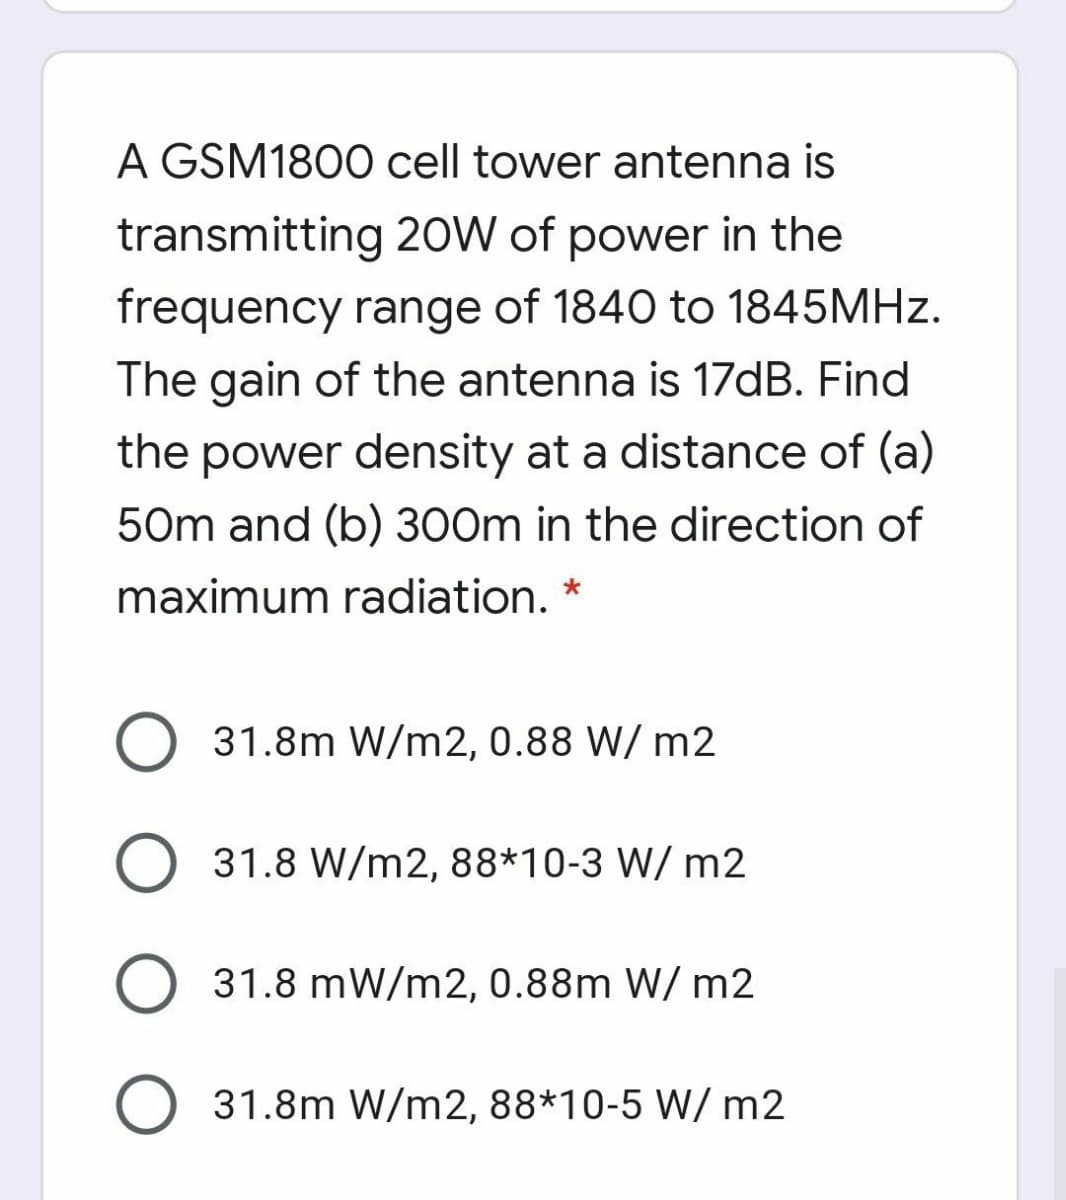 A GSM1800 cell tower antenna is
transmitting 20W of power in the
frequency range of 1840 to 1845MHZ.
The gain of the antenna is 17DB. Find
the power density at a distance of (a)
50m and (b) 300m in the direction of
maximum radiation. *
31.8m W/m2, 0.88 W/ m2
31.8 W/m2, 88*10-3 W/ m2
O 31.8 mW/m2, 0.88m W/ m2
31.8m W/m2, 88*10-5 W/ m2
